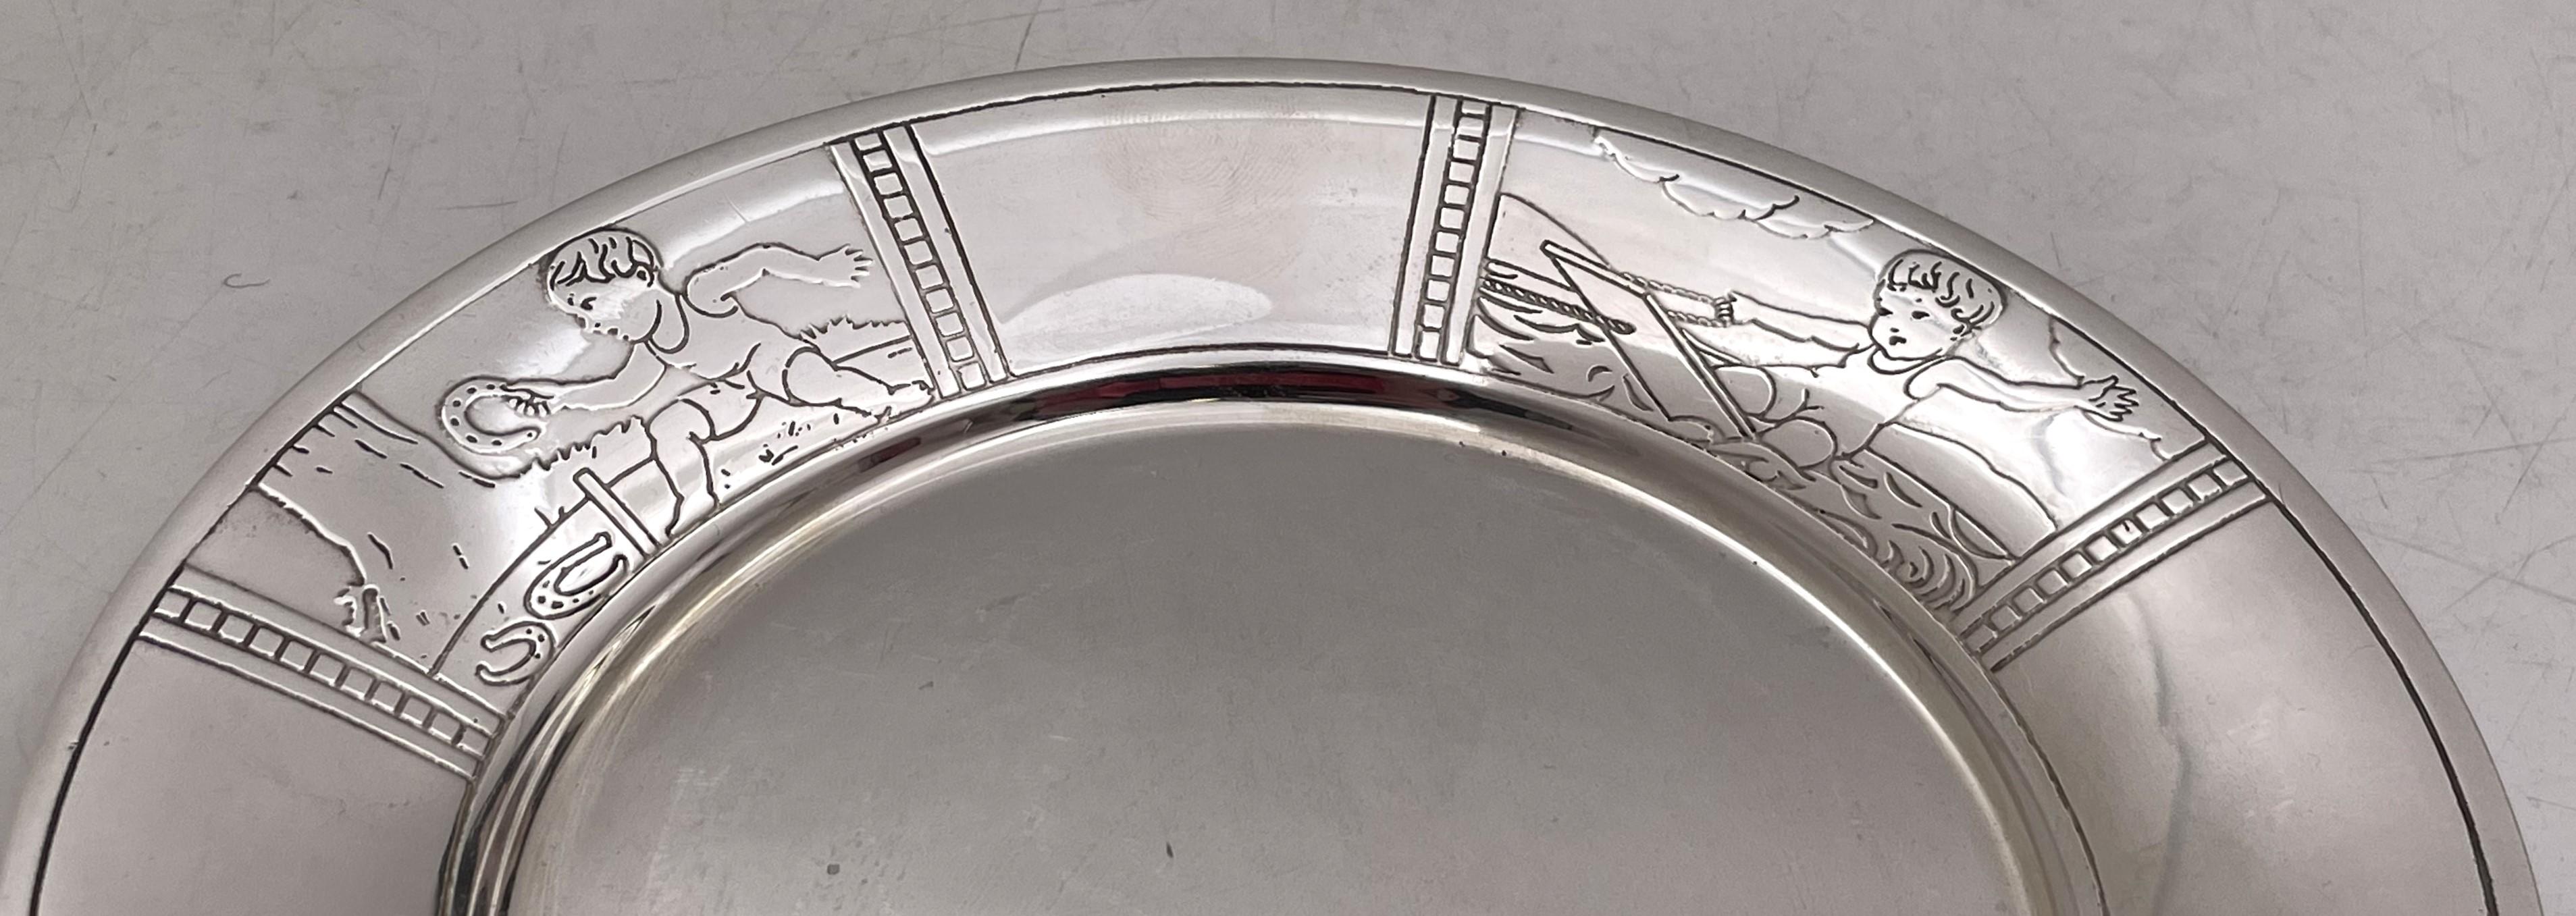 Tiffany & Co. Sterling Silver Child Bowl & Underplate with Boys Playing Sports For Sale 3